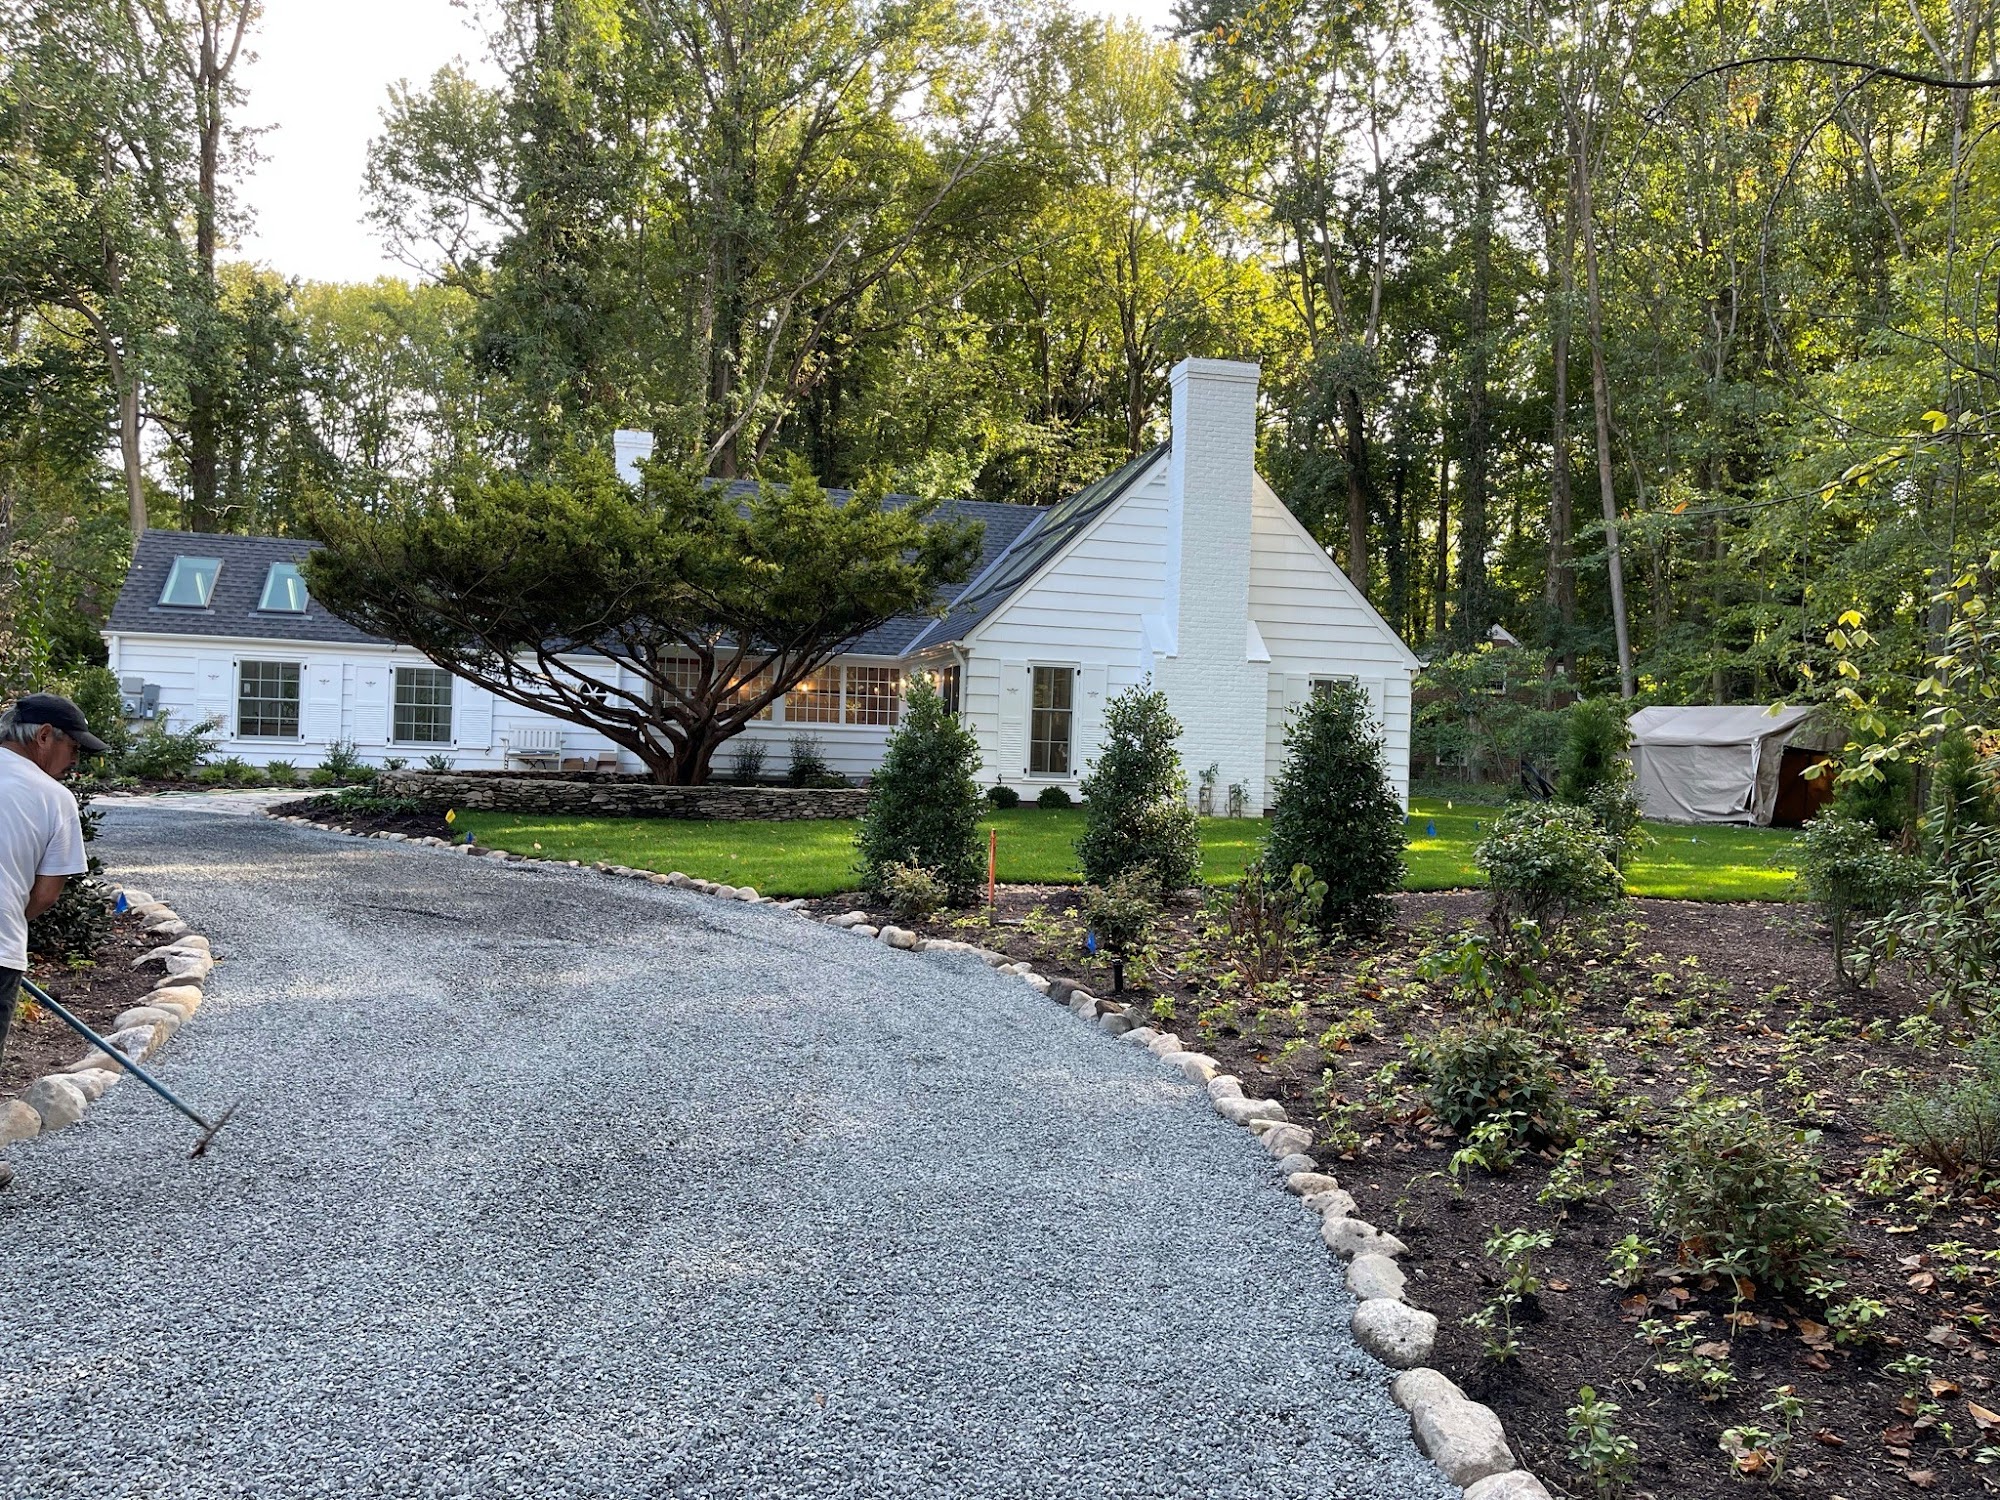 D&D Tree & Landscaping Inc 110 W Crooked Hill Rd, Pearl River New York 10965